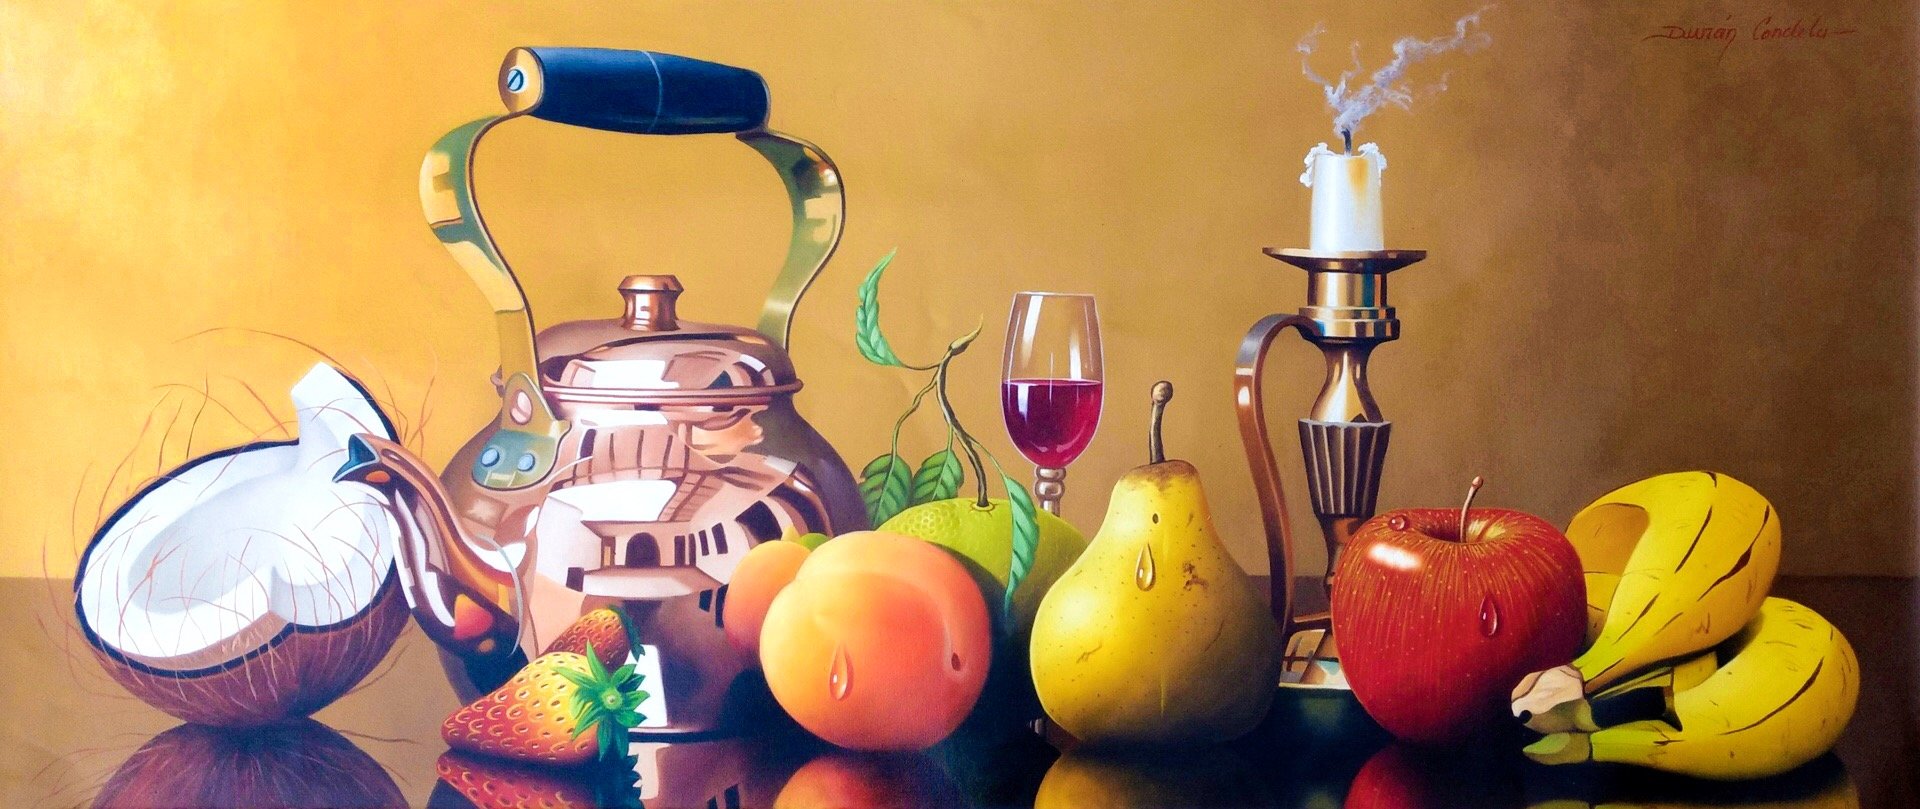 Original Still Life Oil Painting on Canvas depicting fruits, a bronze teapot, wine glass, and a candle.